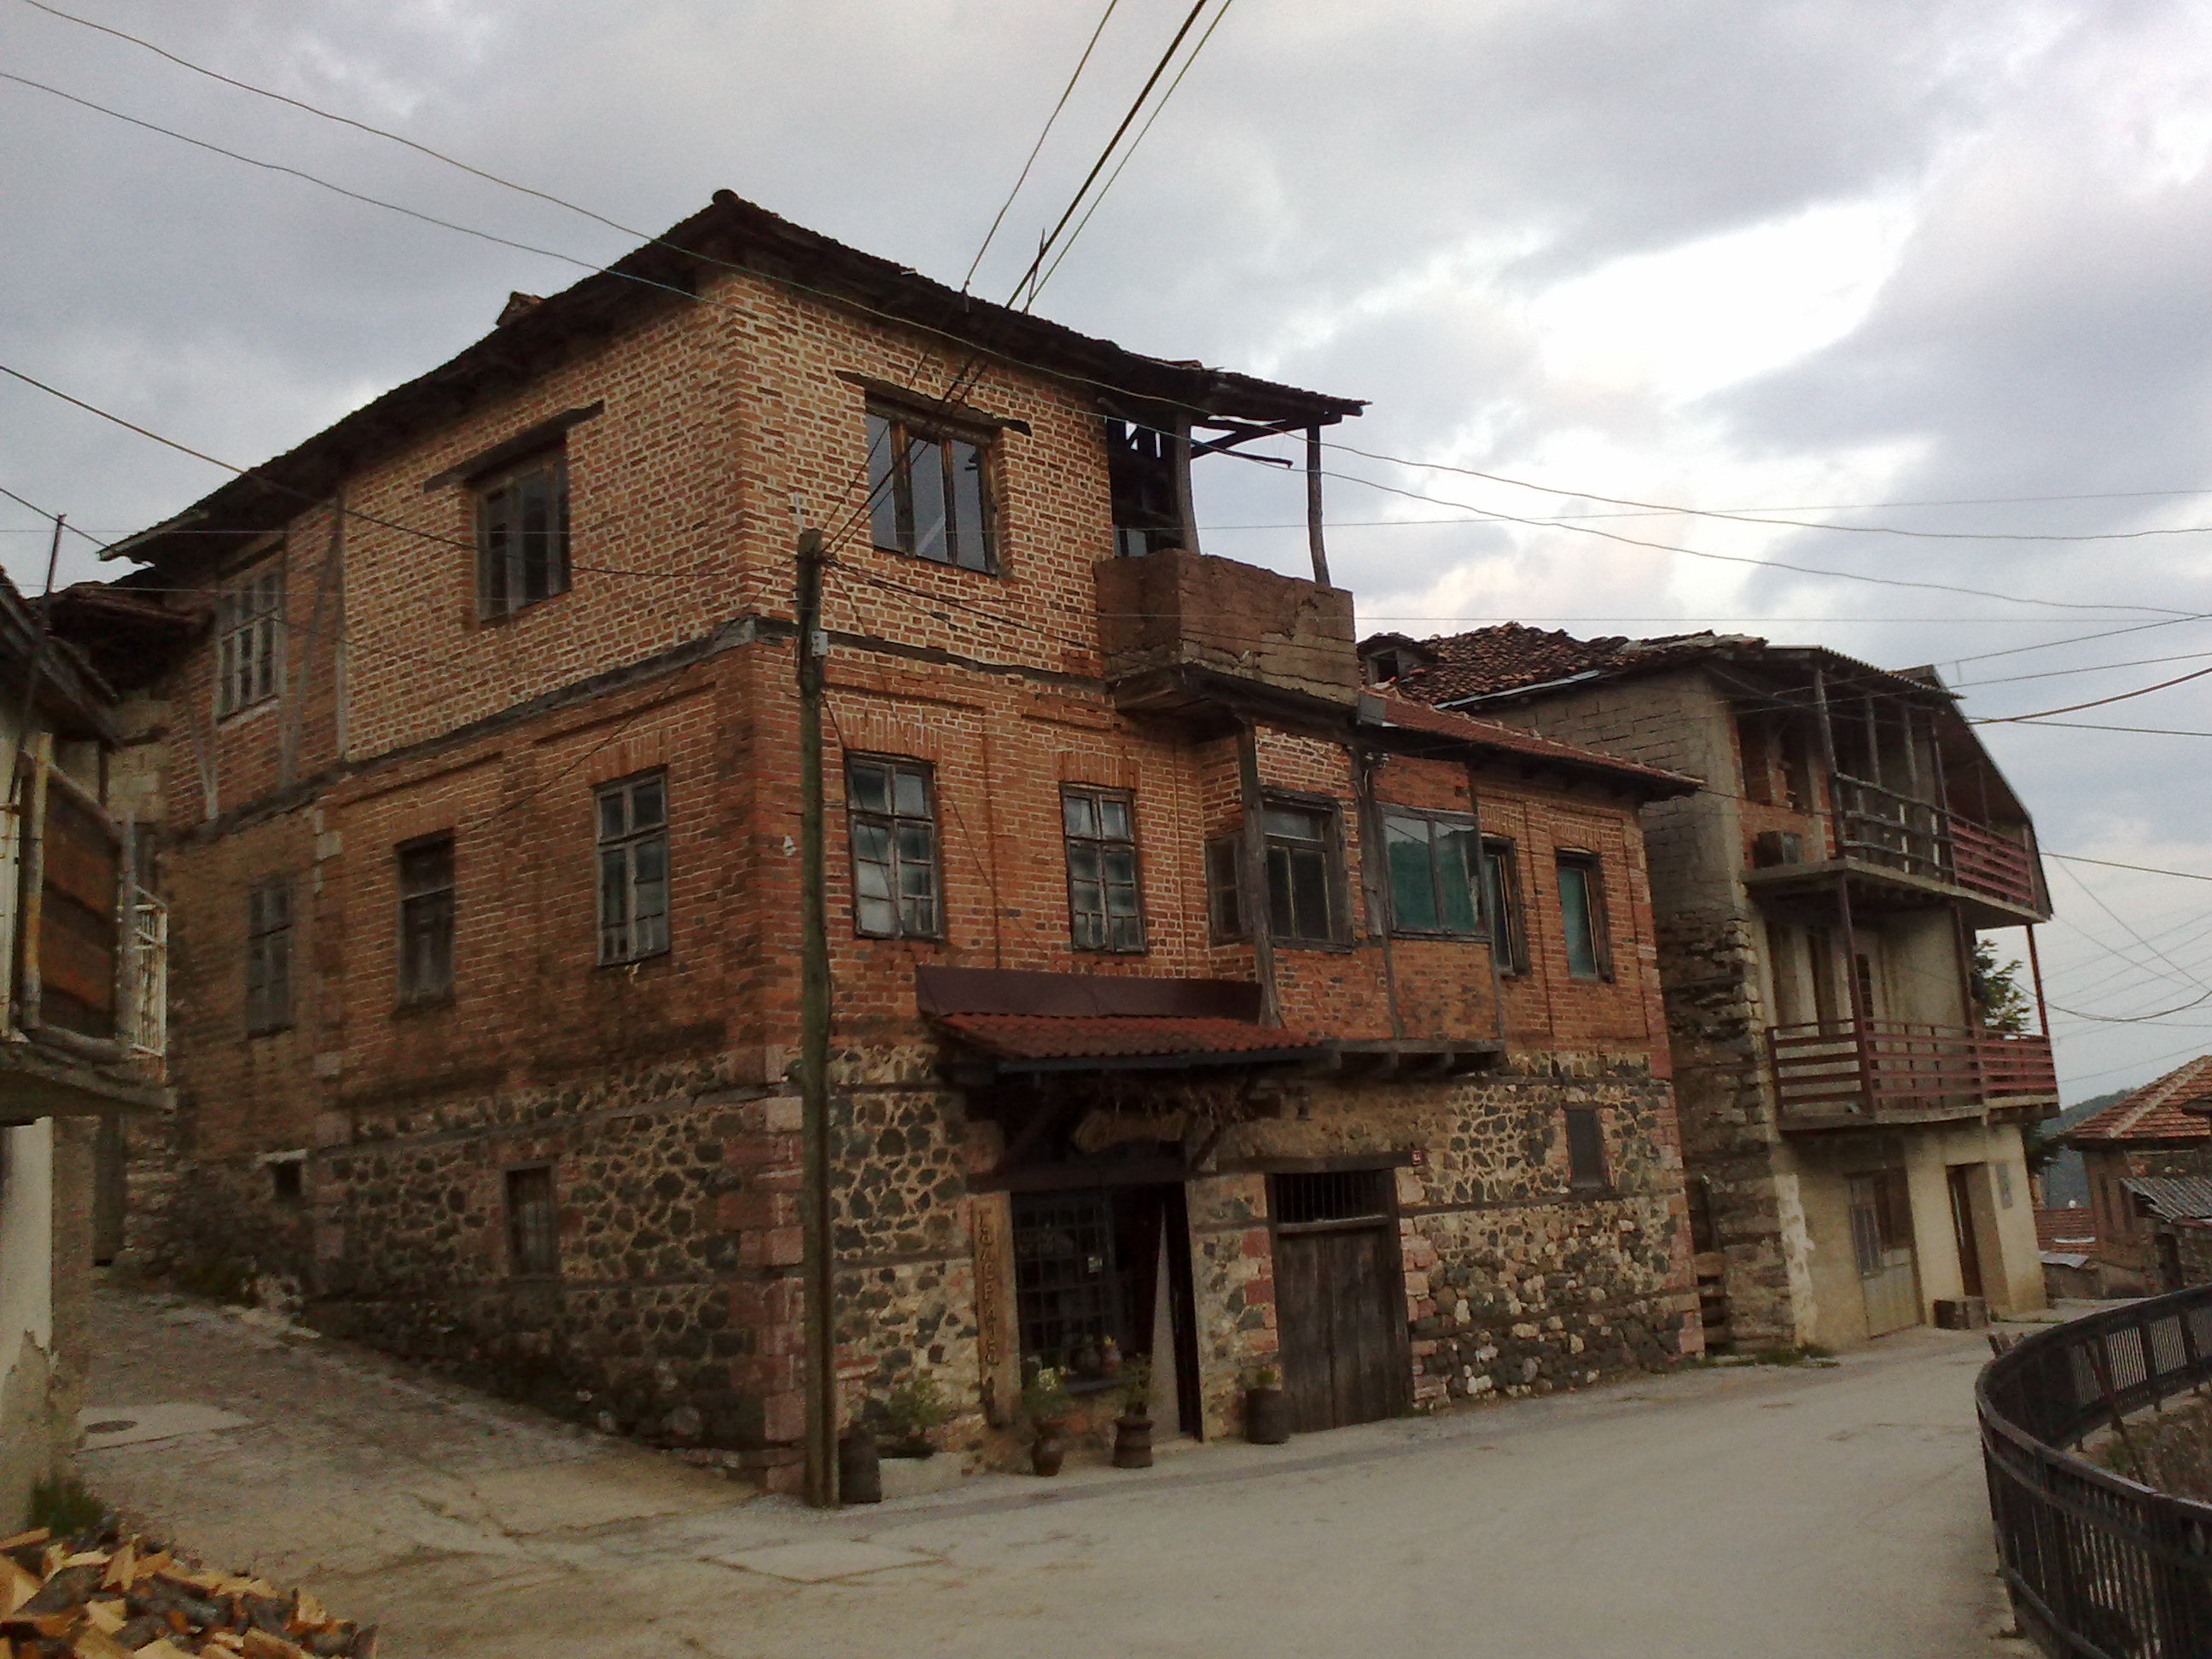 File:Old house in Vevcani village in Macedonia.jpg - Wikimedia Commons